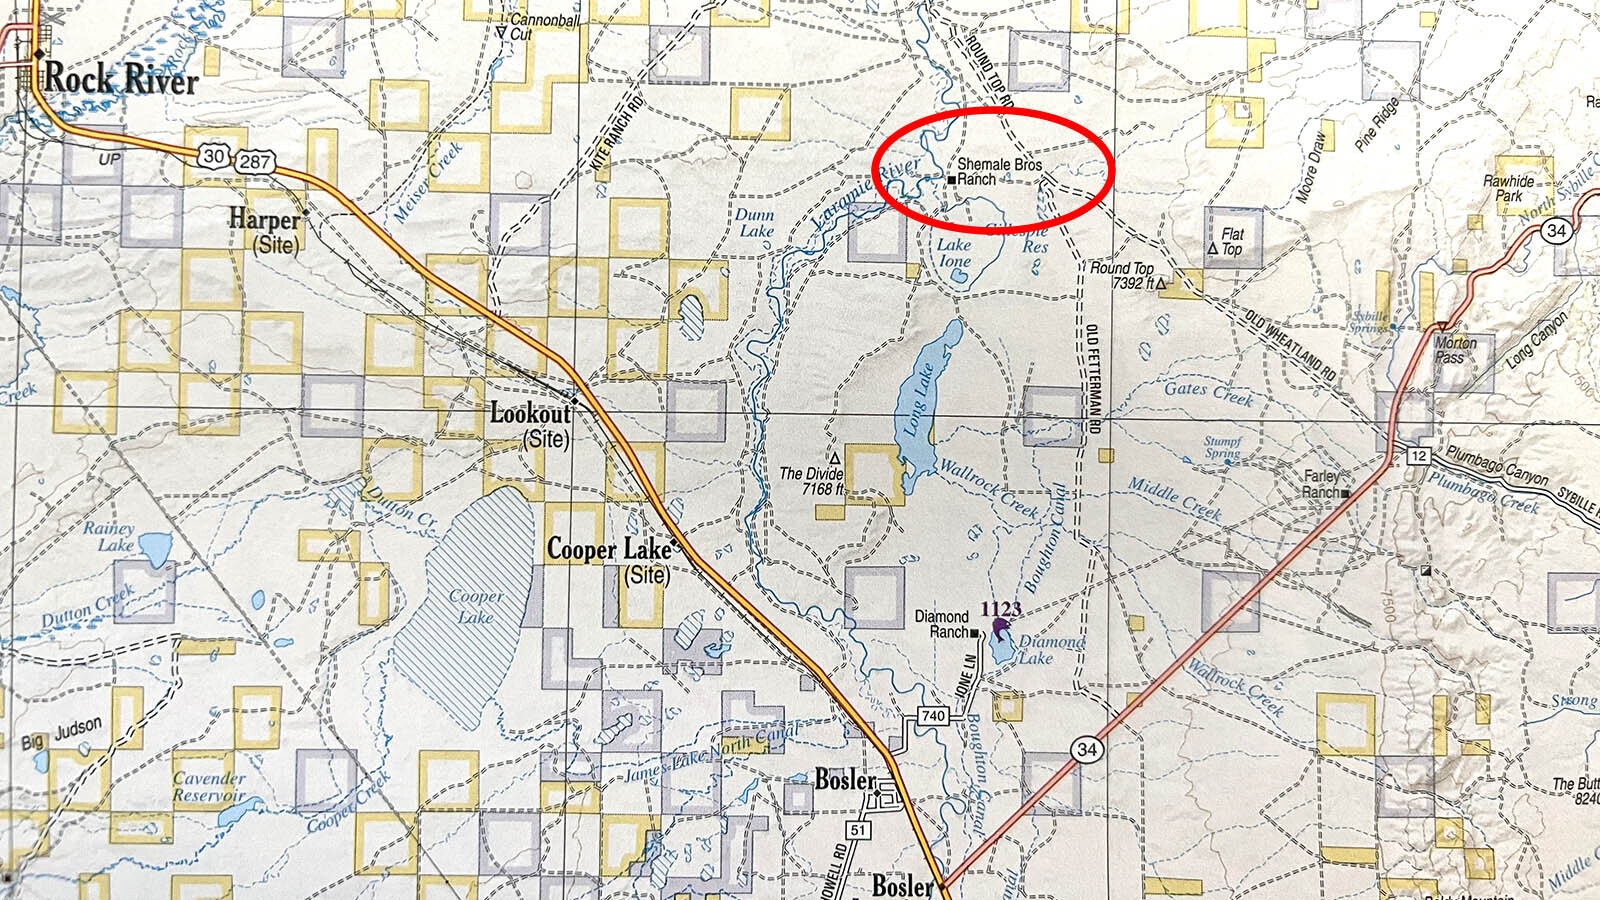 The Schmale Bros. Ranch, incorrectly marked here as "Shemale Bros. Ranch," is in northern Albany County, east of Rock River.